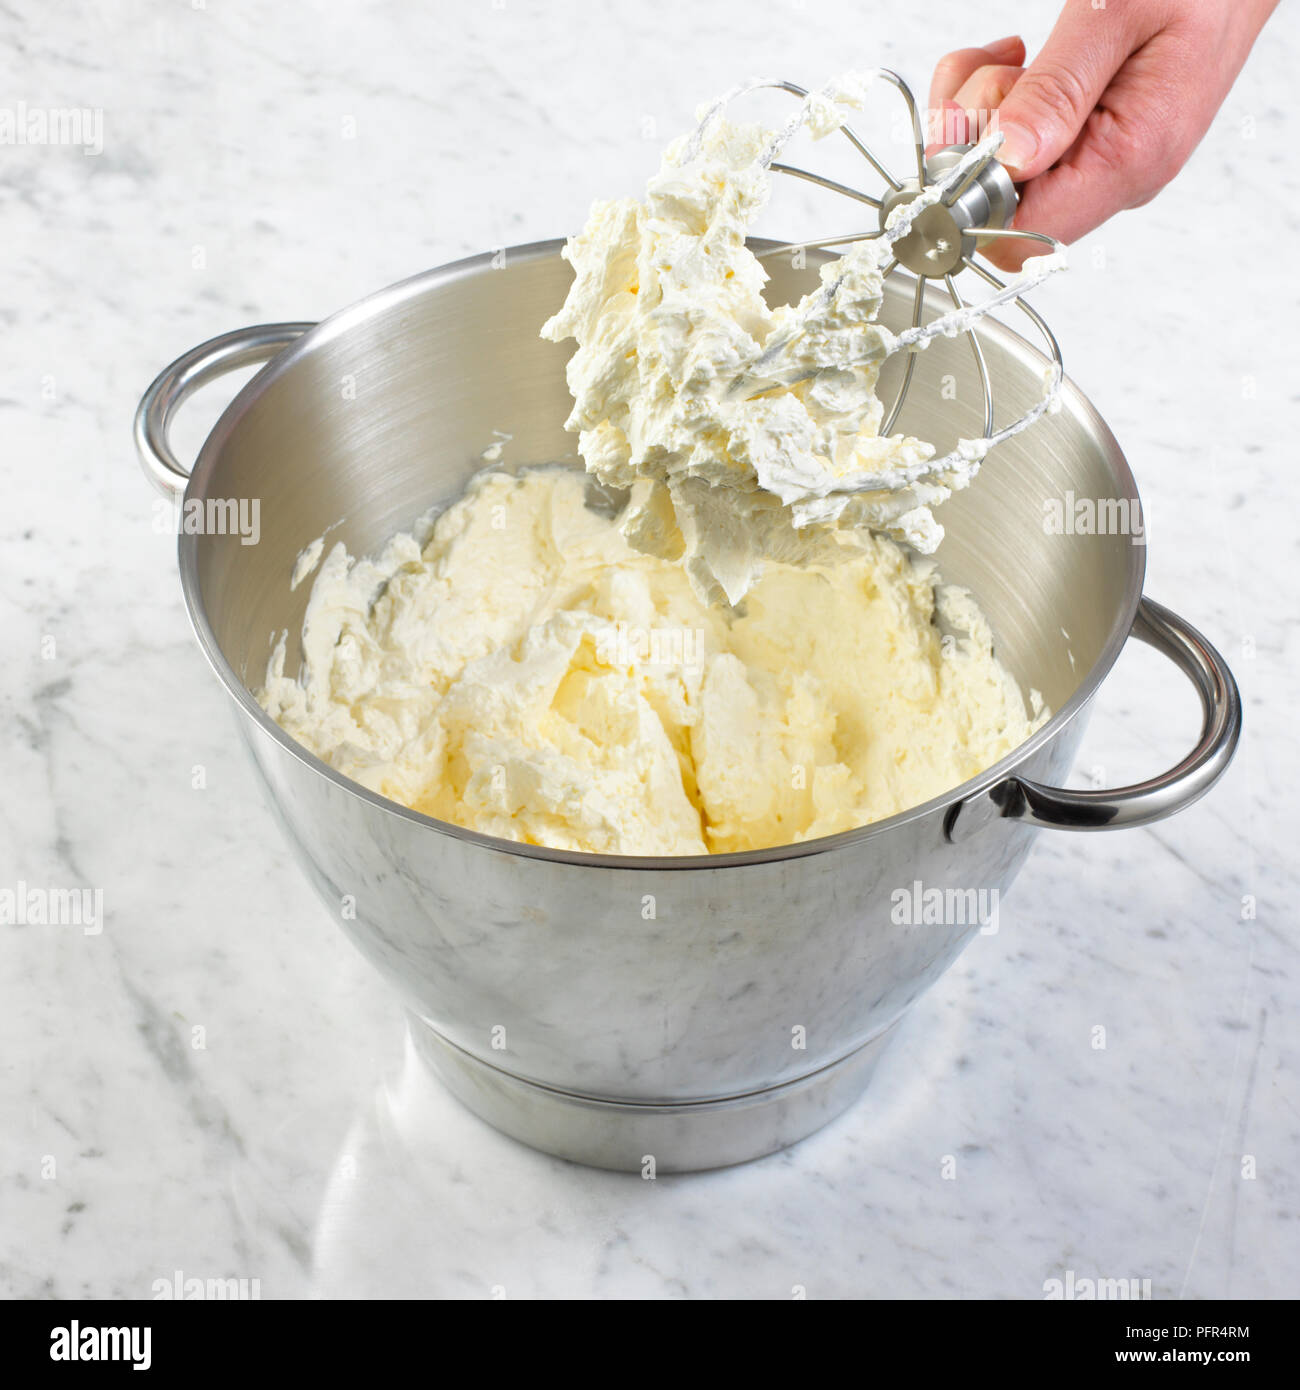 Buttercream icing in food processor bowl Stock Photo